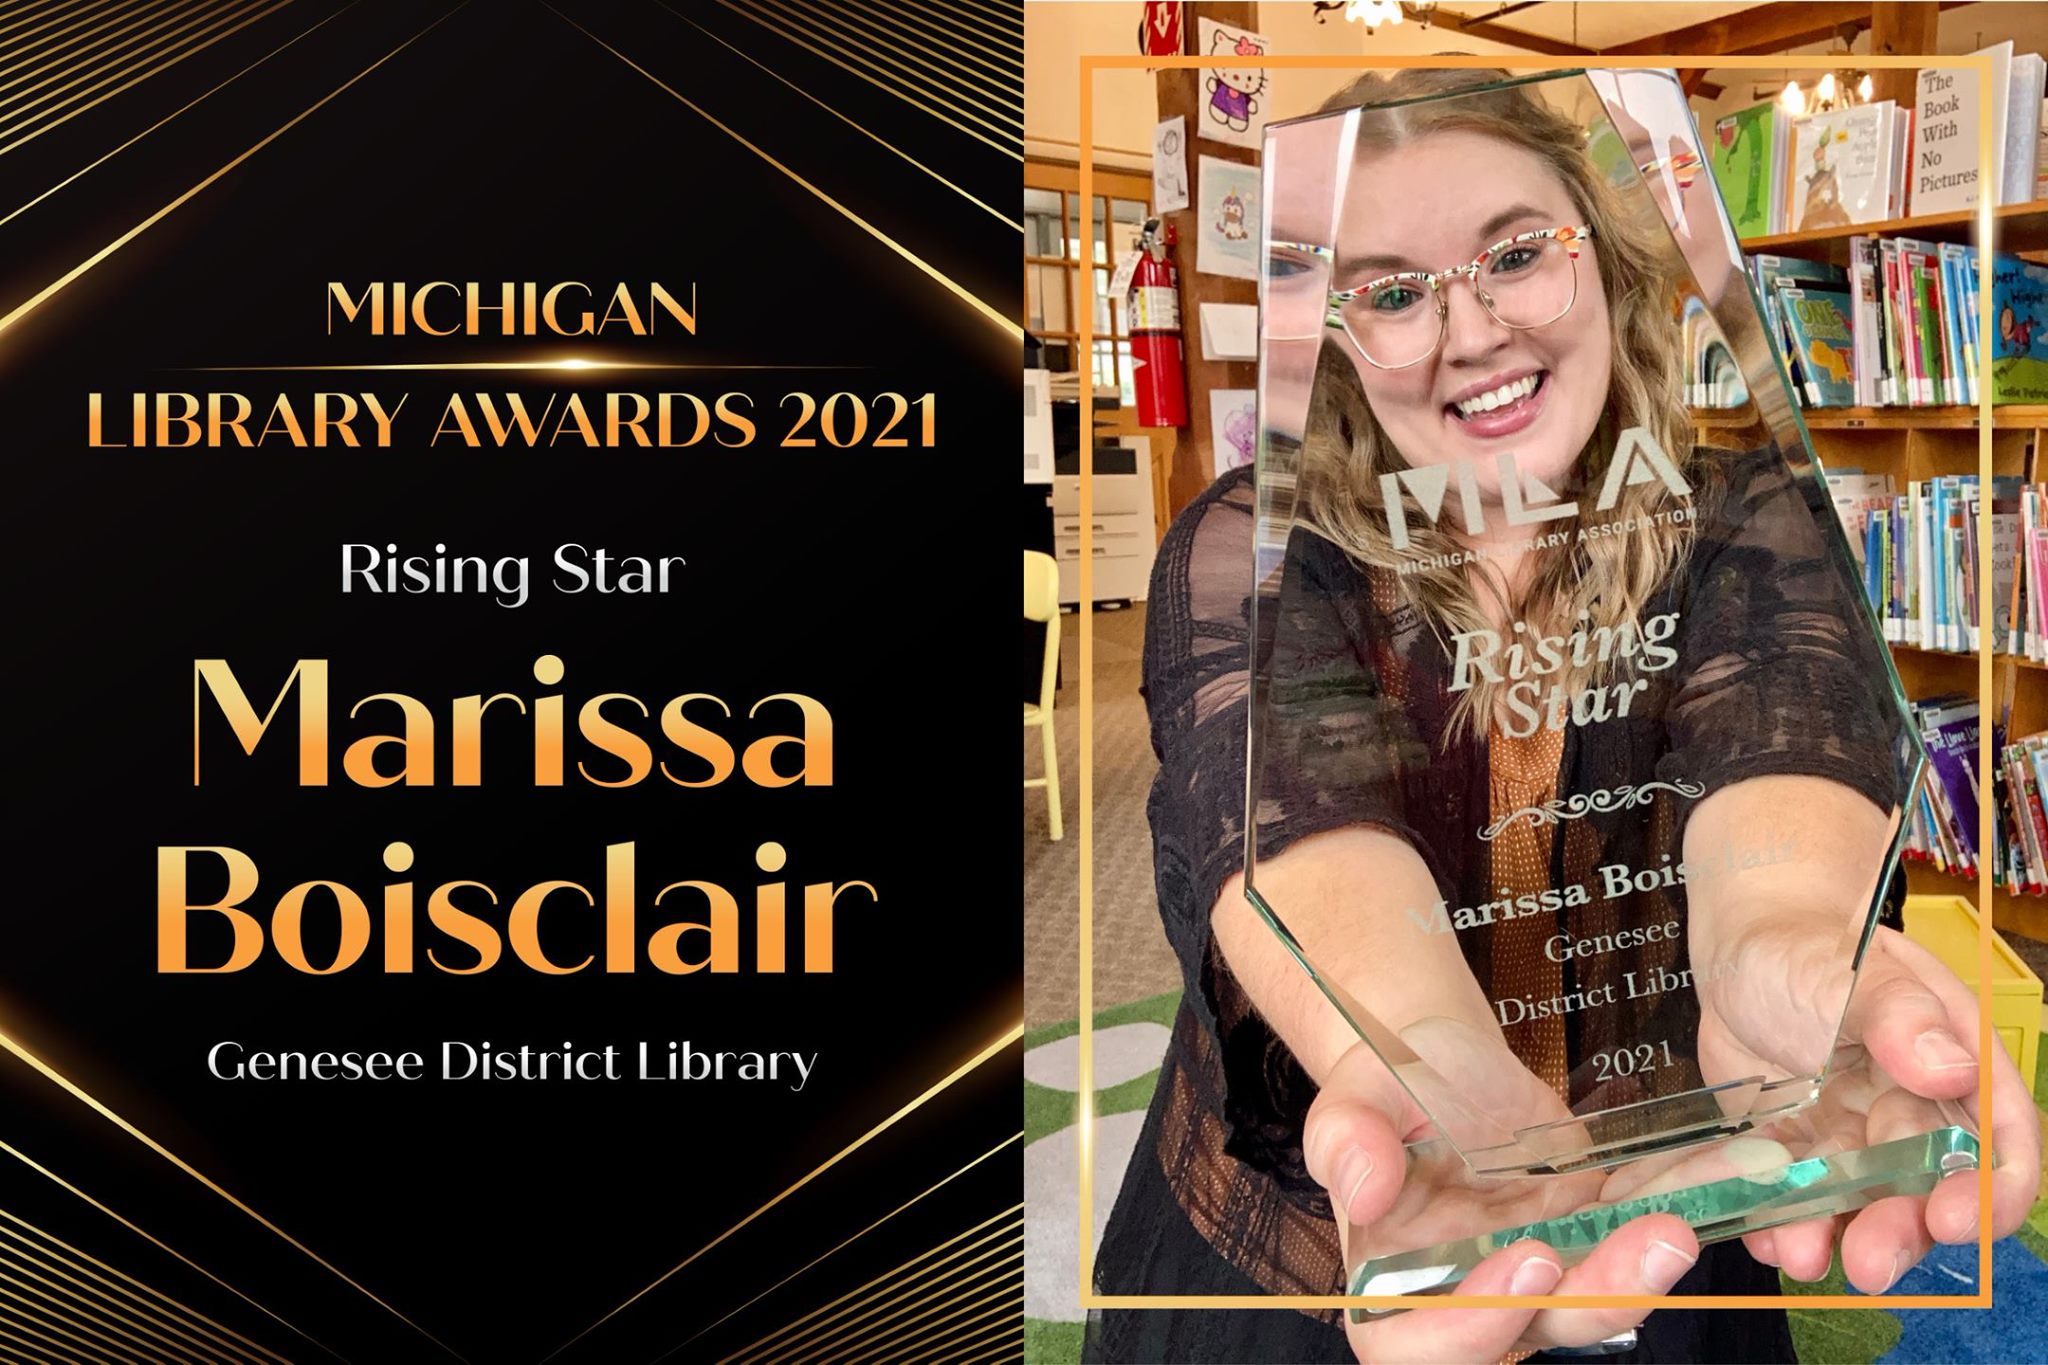 SIS alumna Marissa Boisclair is pictured with her Michigan Library Association Rising Star Award